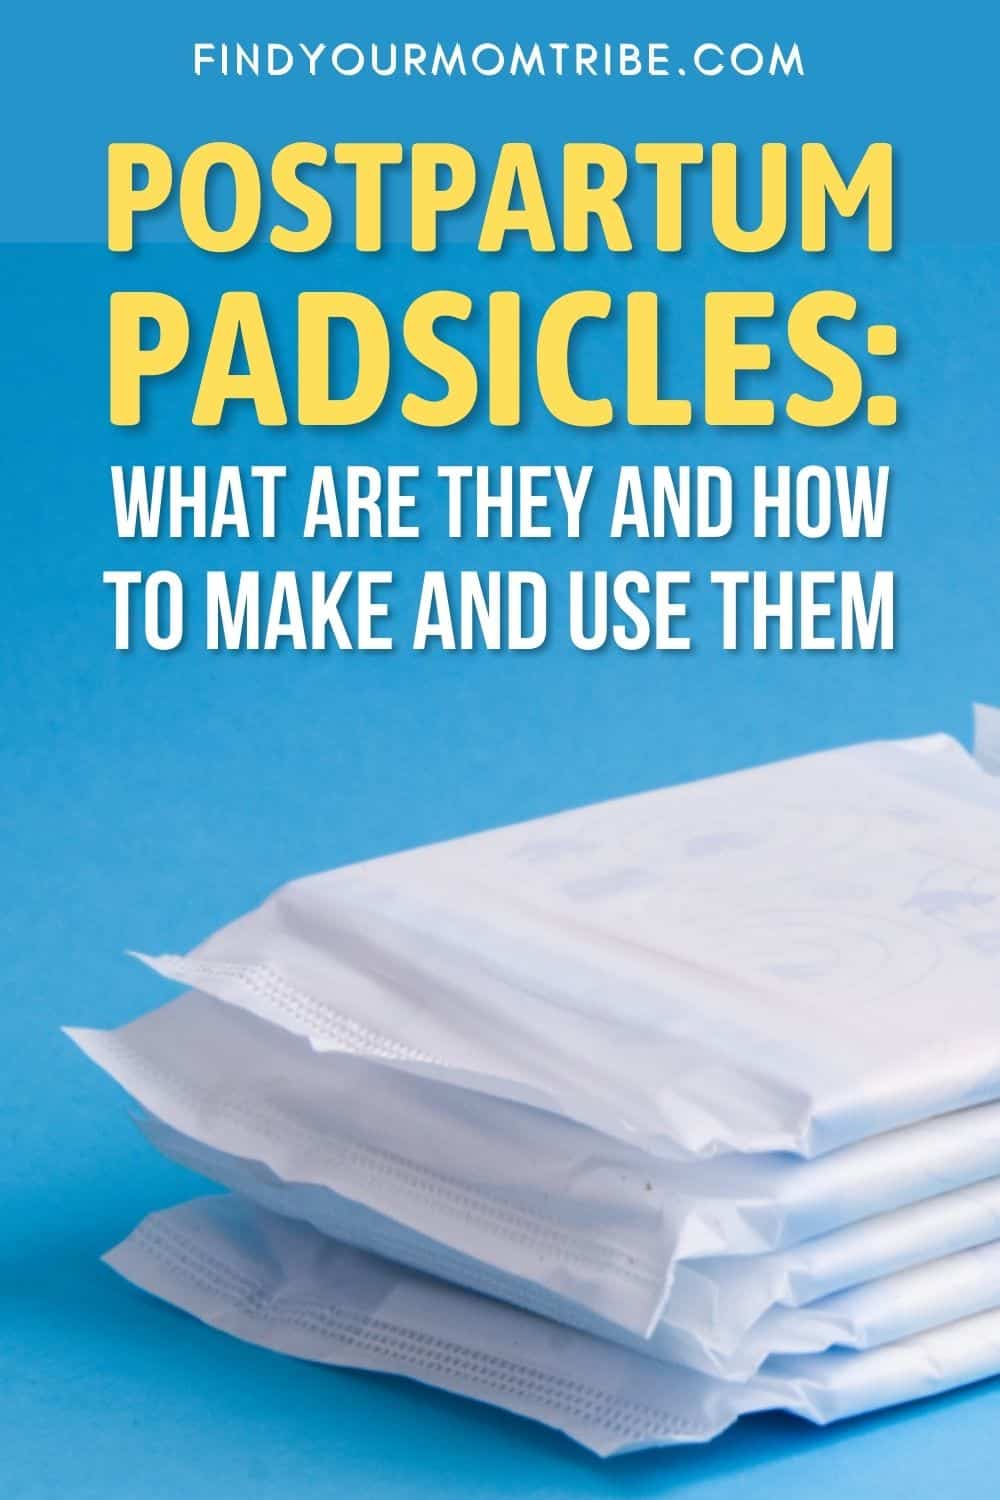 Postpartum Padsicles – What Are They And How To Make And Use Them Pinterest